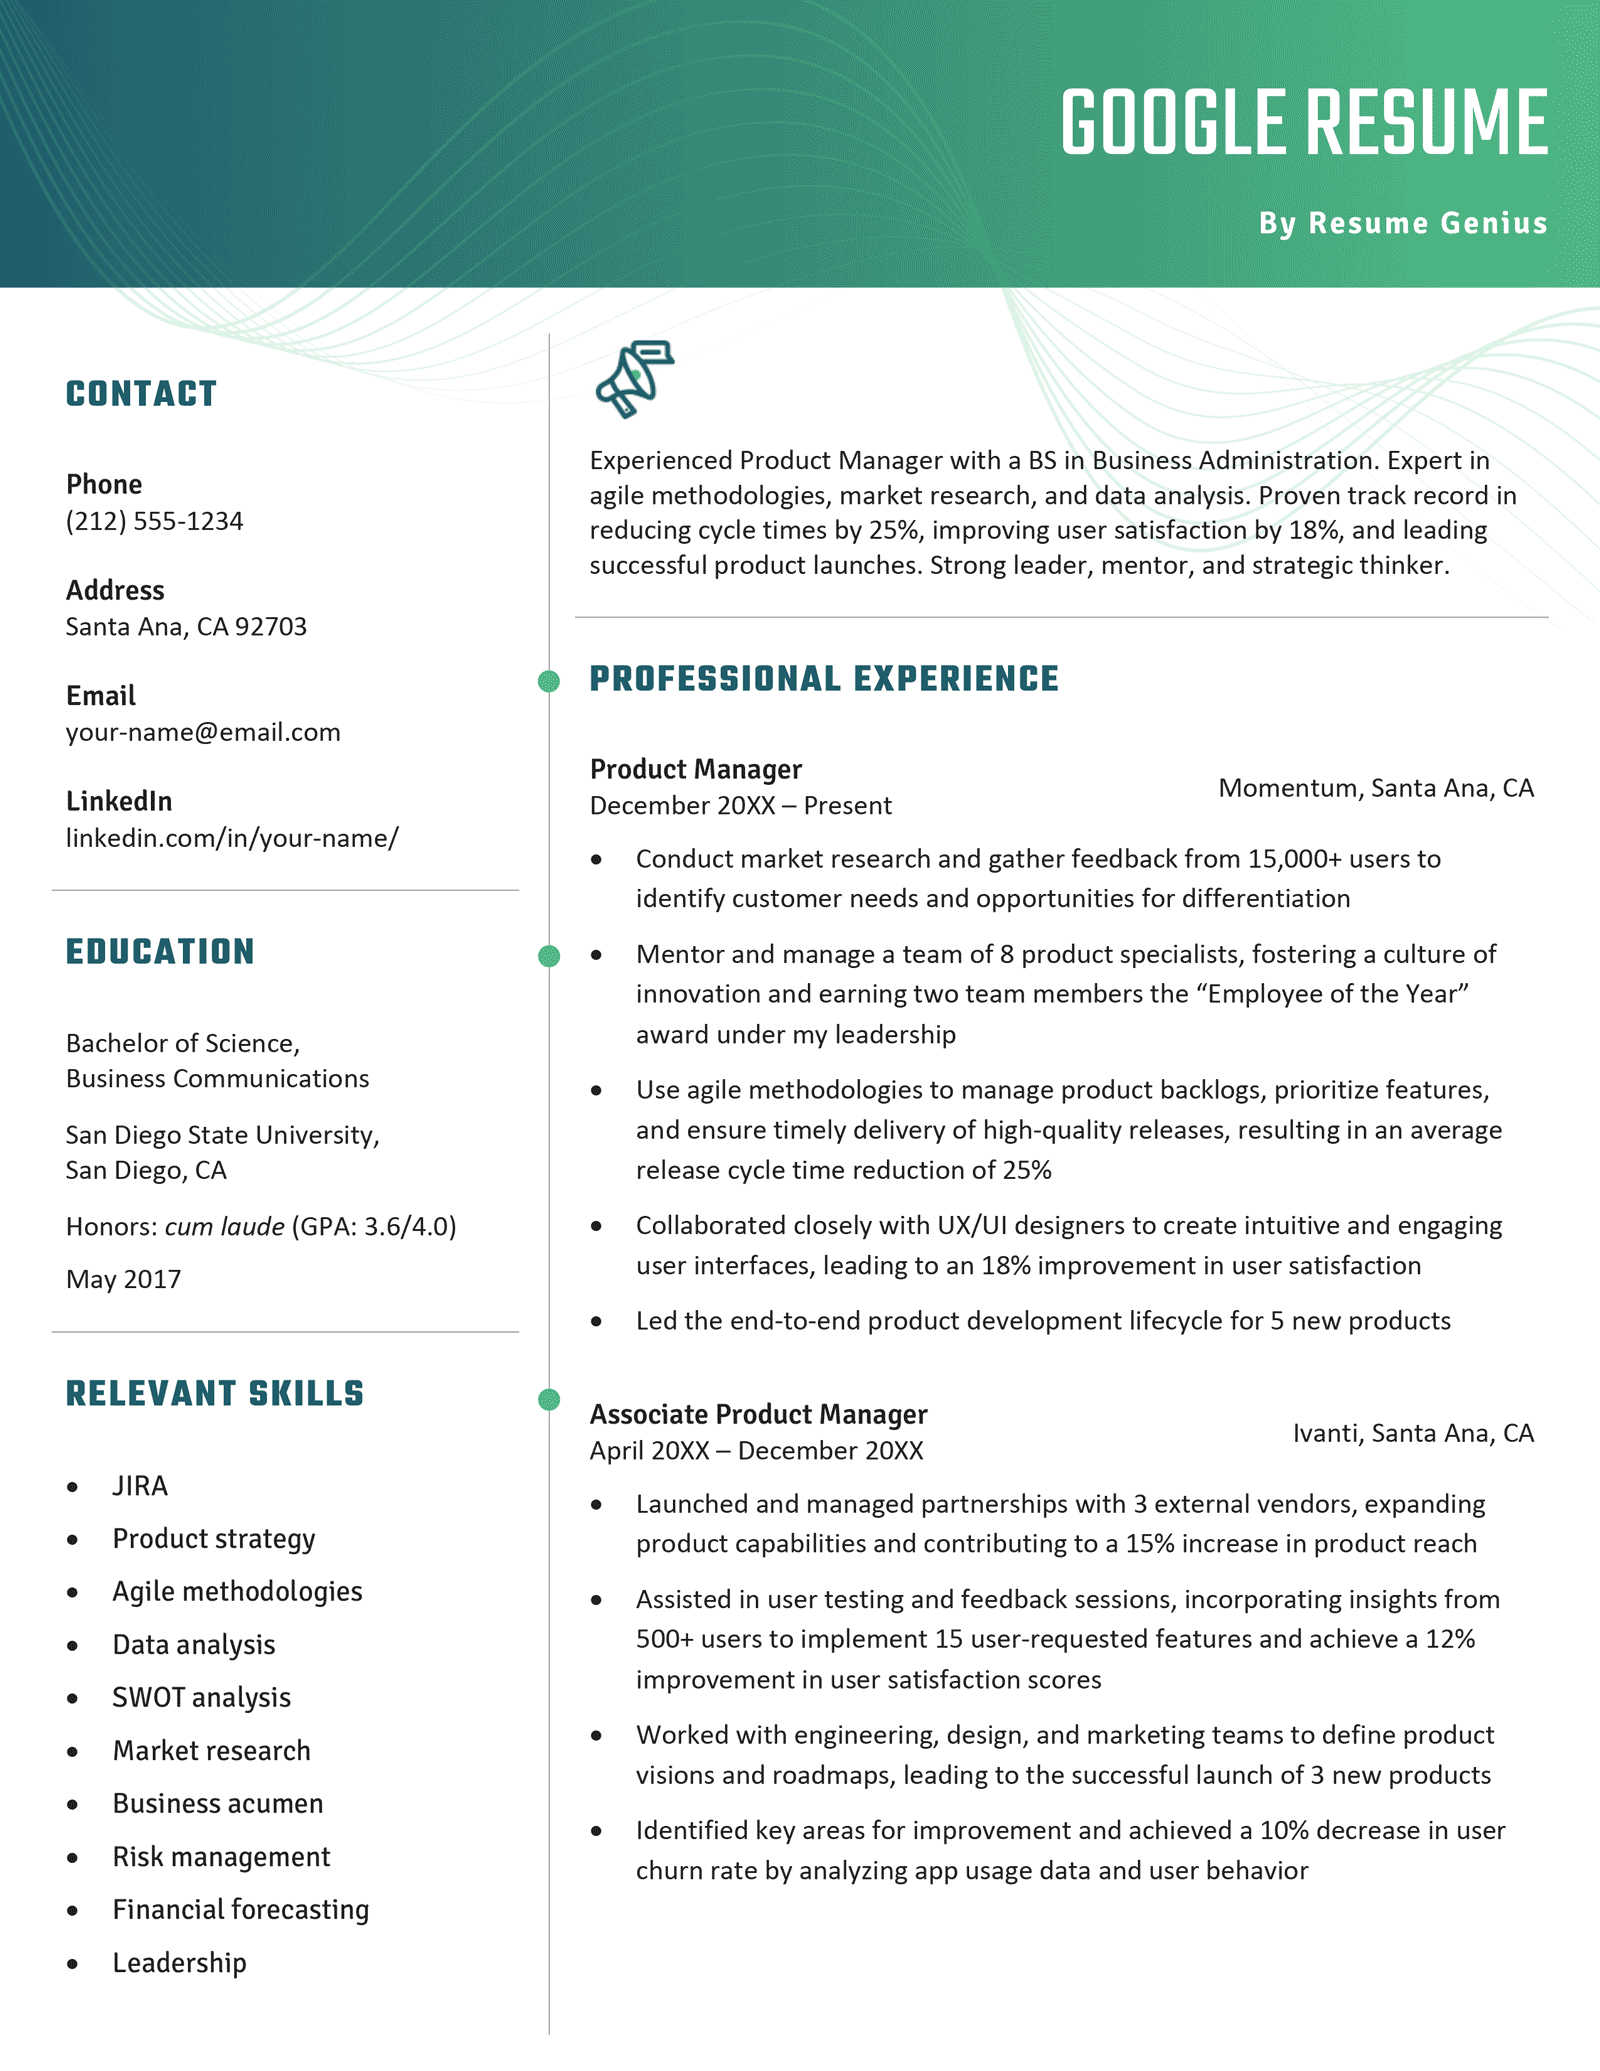 A Google resume example on a template with a wider header with a turquoise gradient.